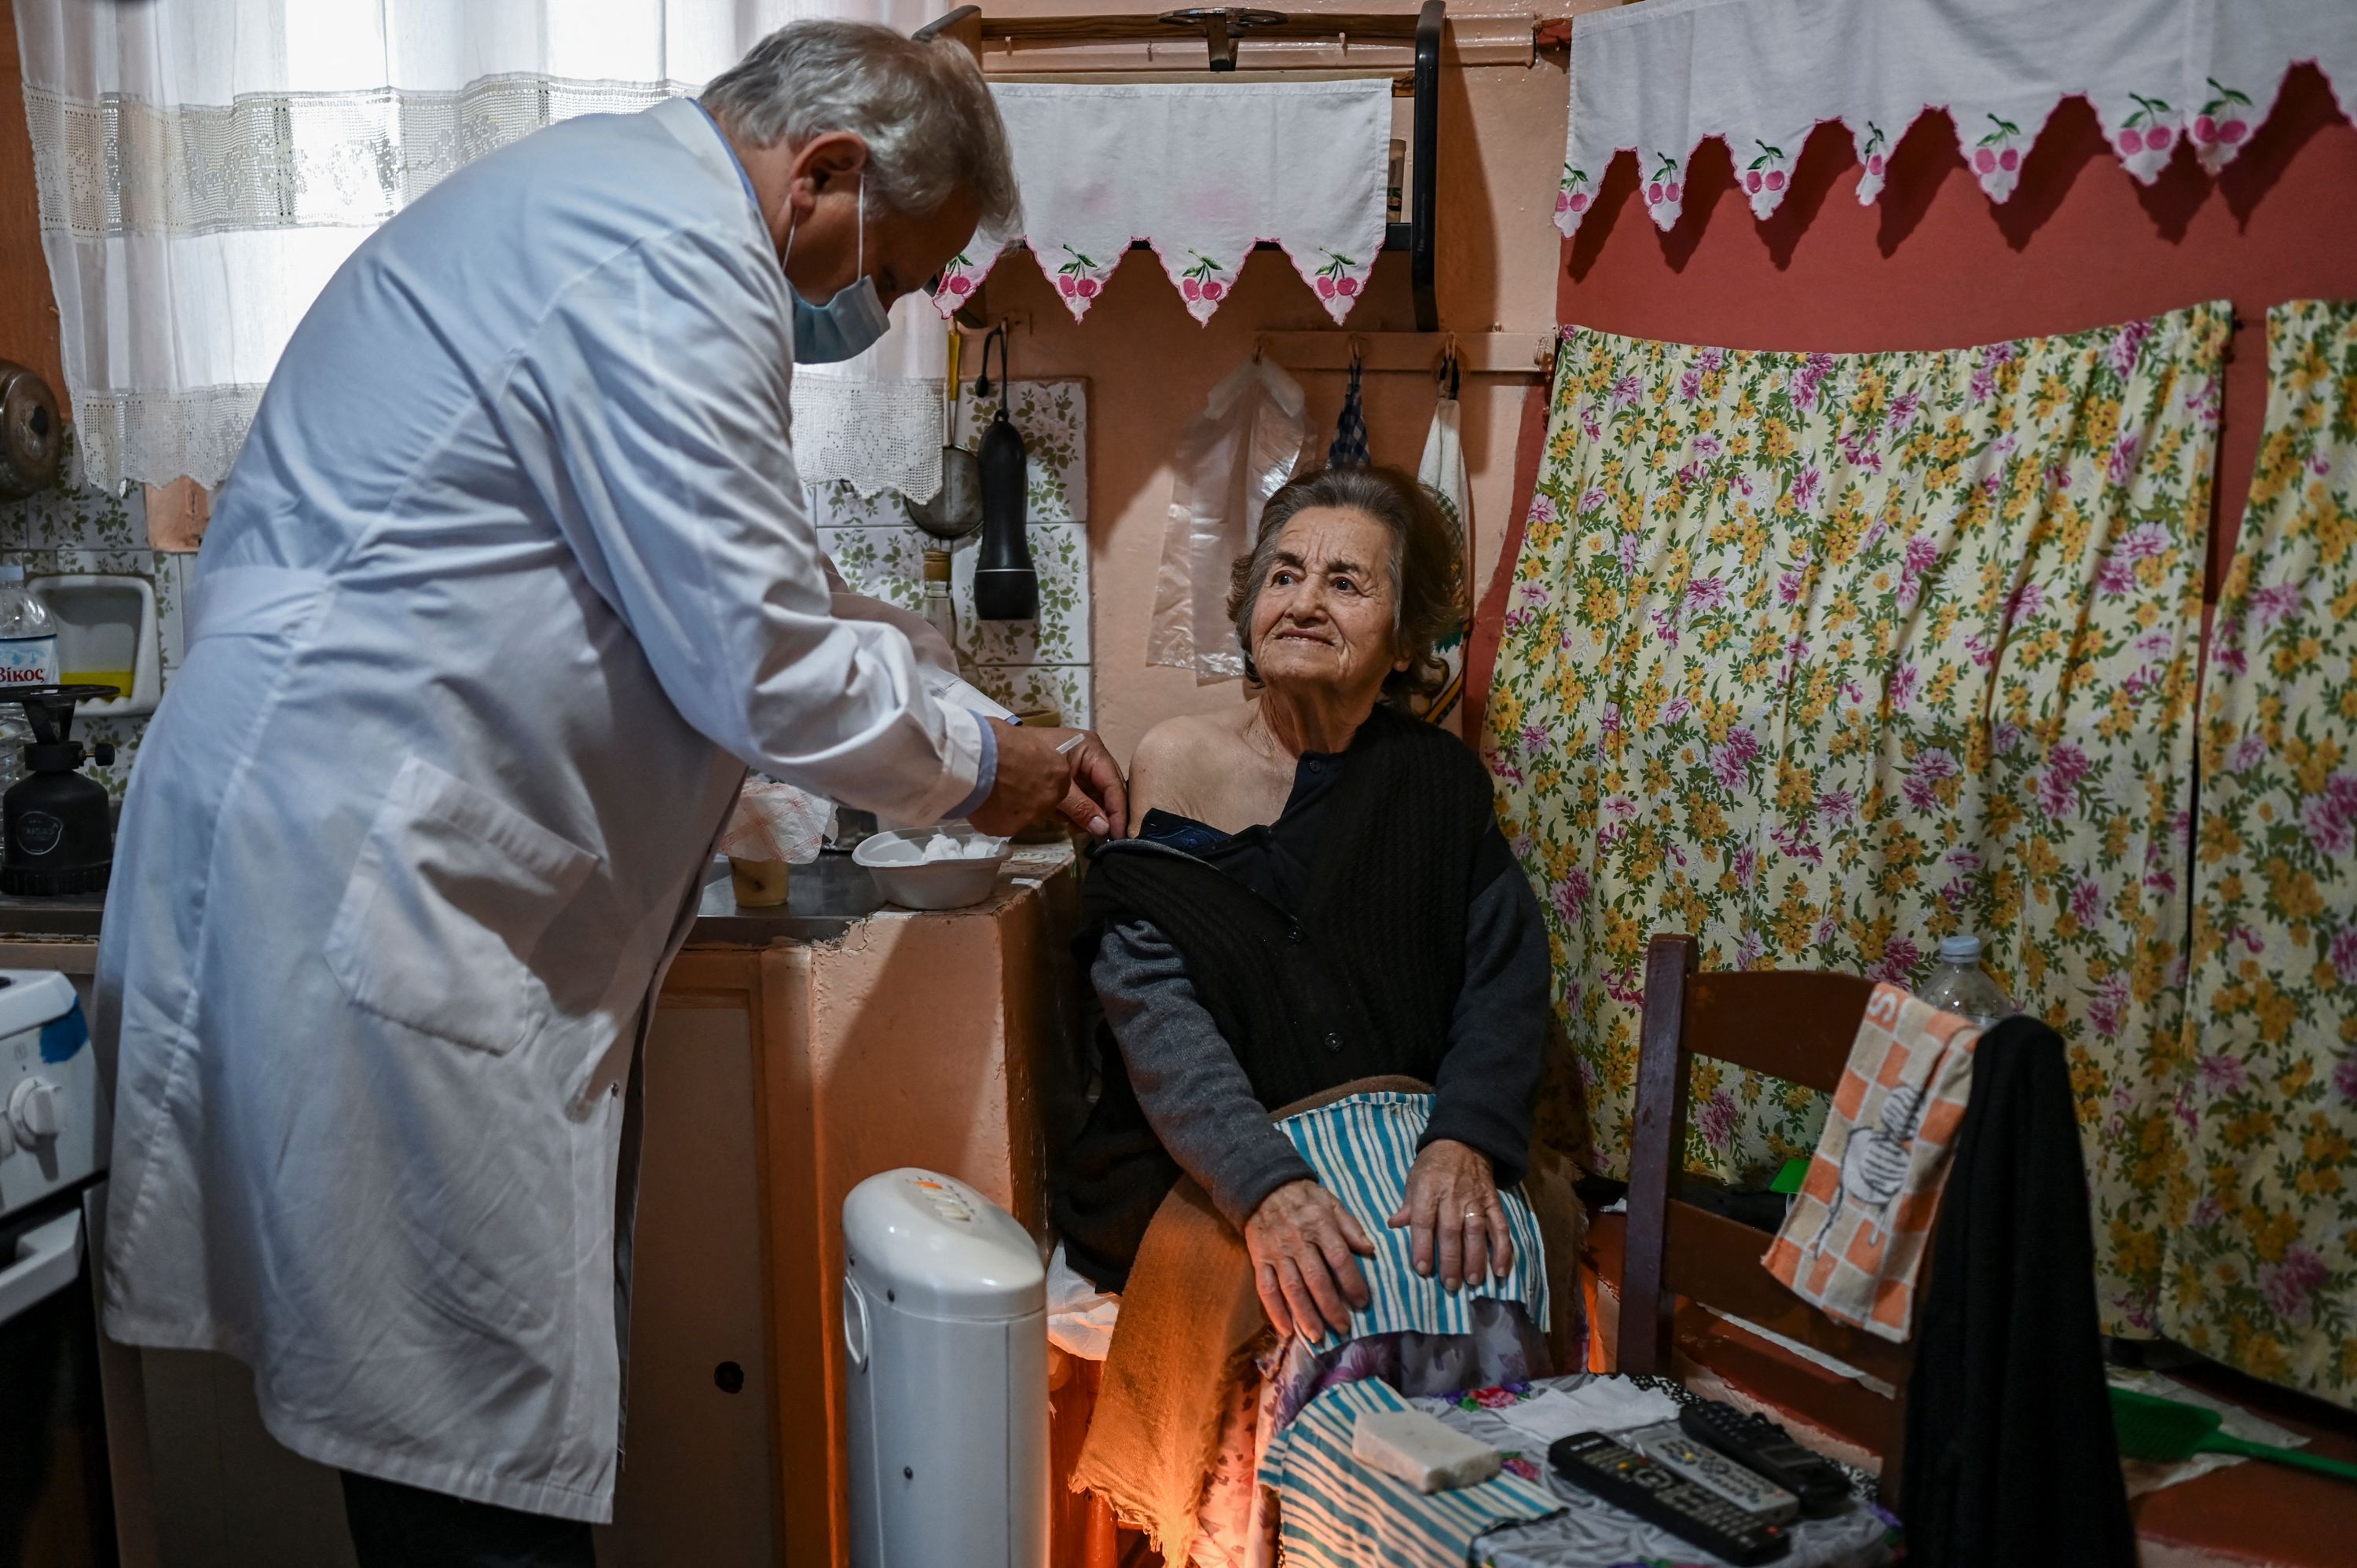 An elderly woman is vaccinated against Covid-19 on the Elafonissos Island, on April 23